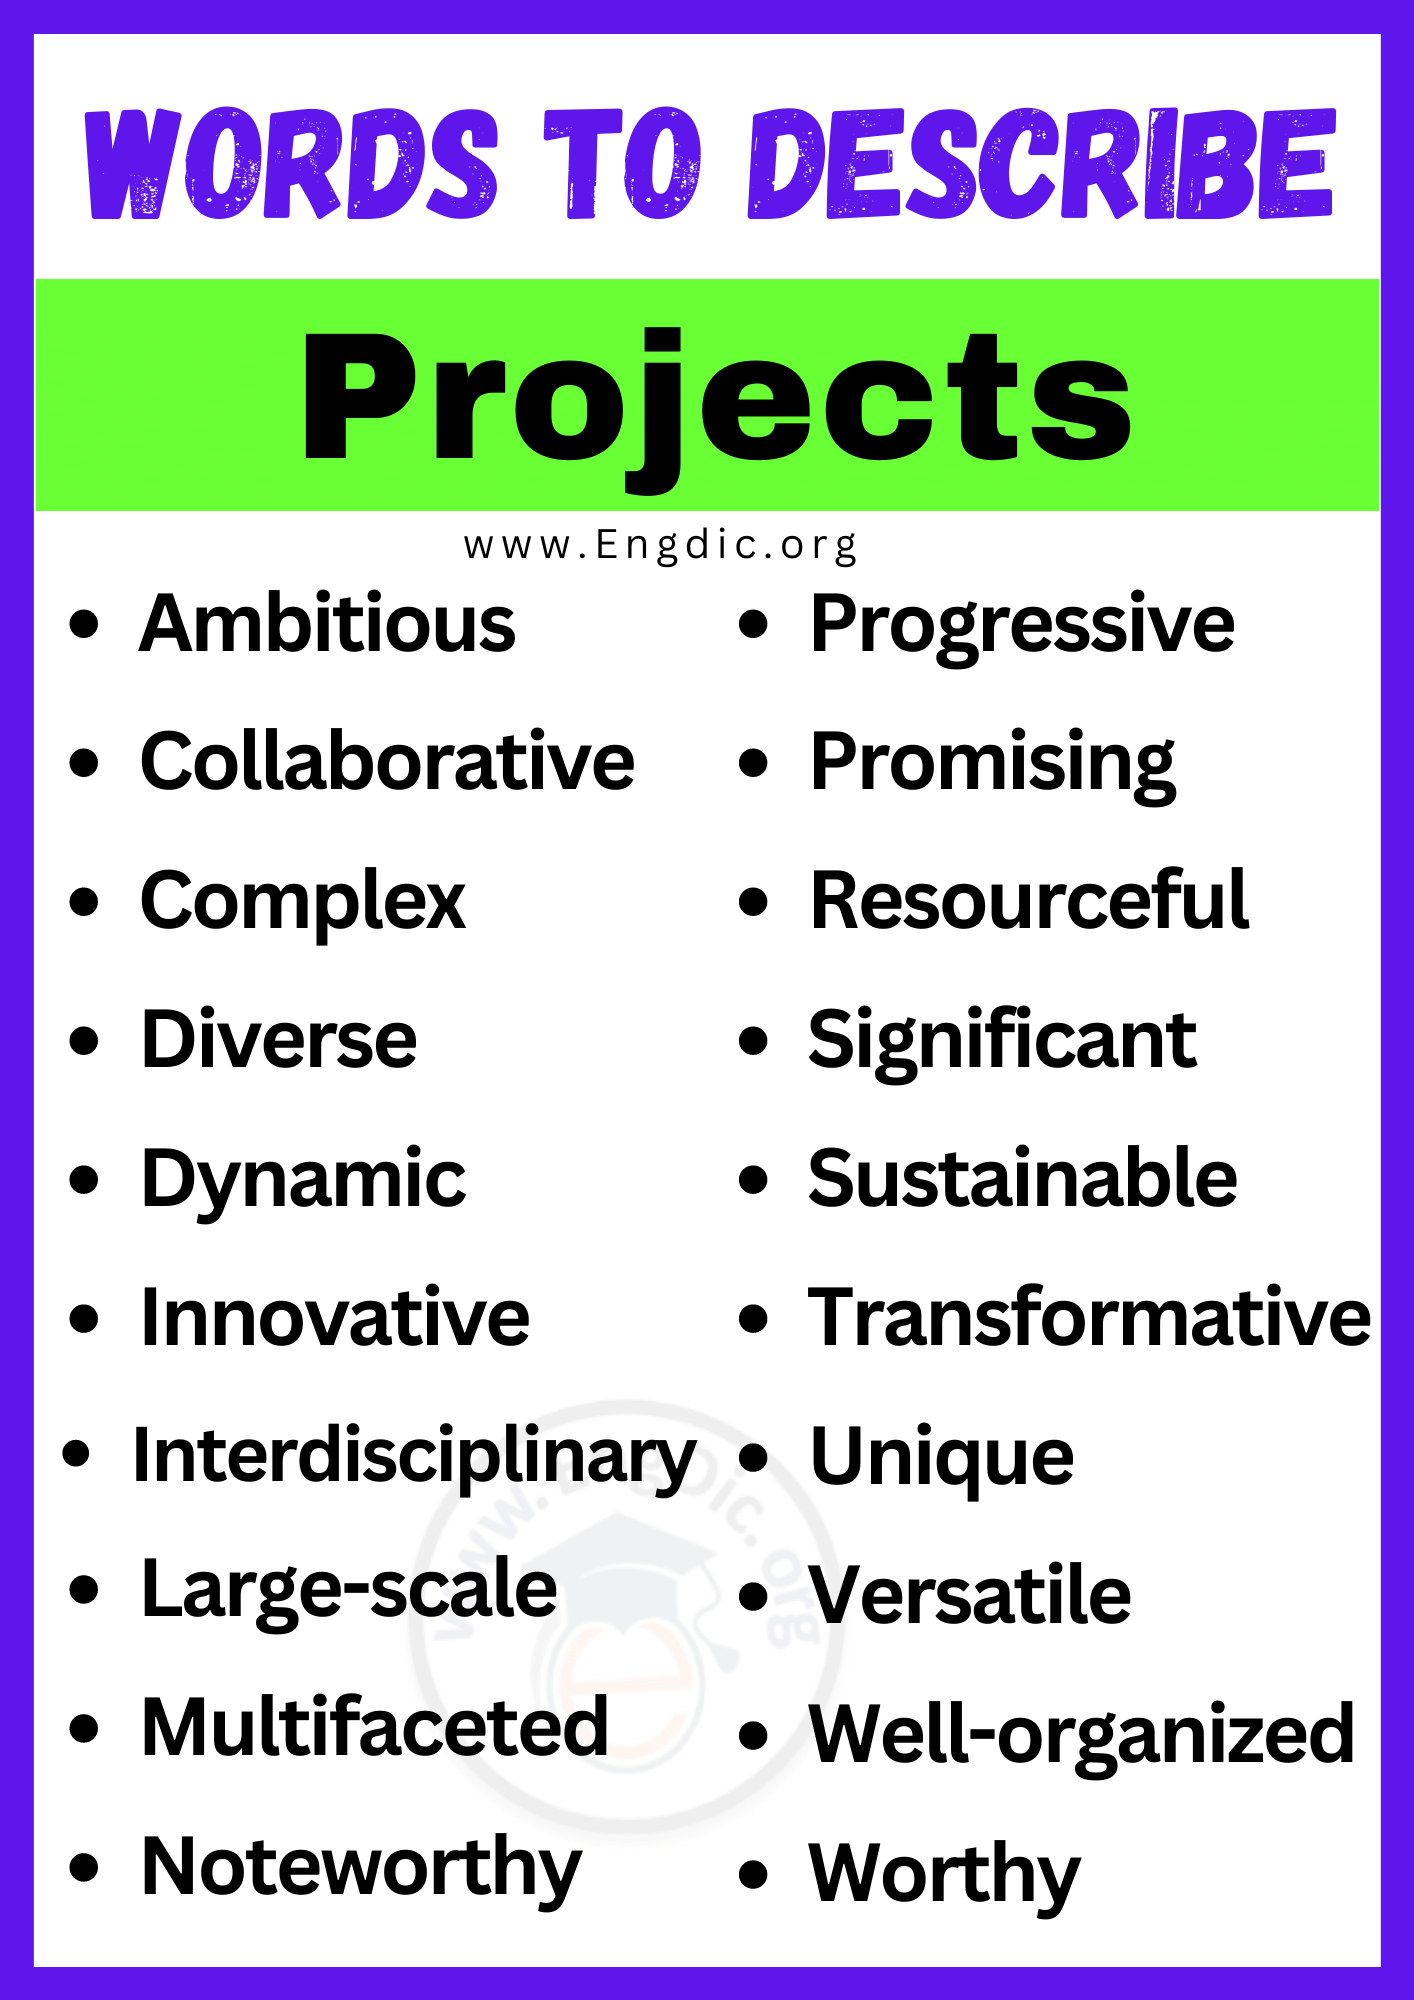 Words to Describe Projects